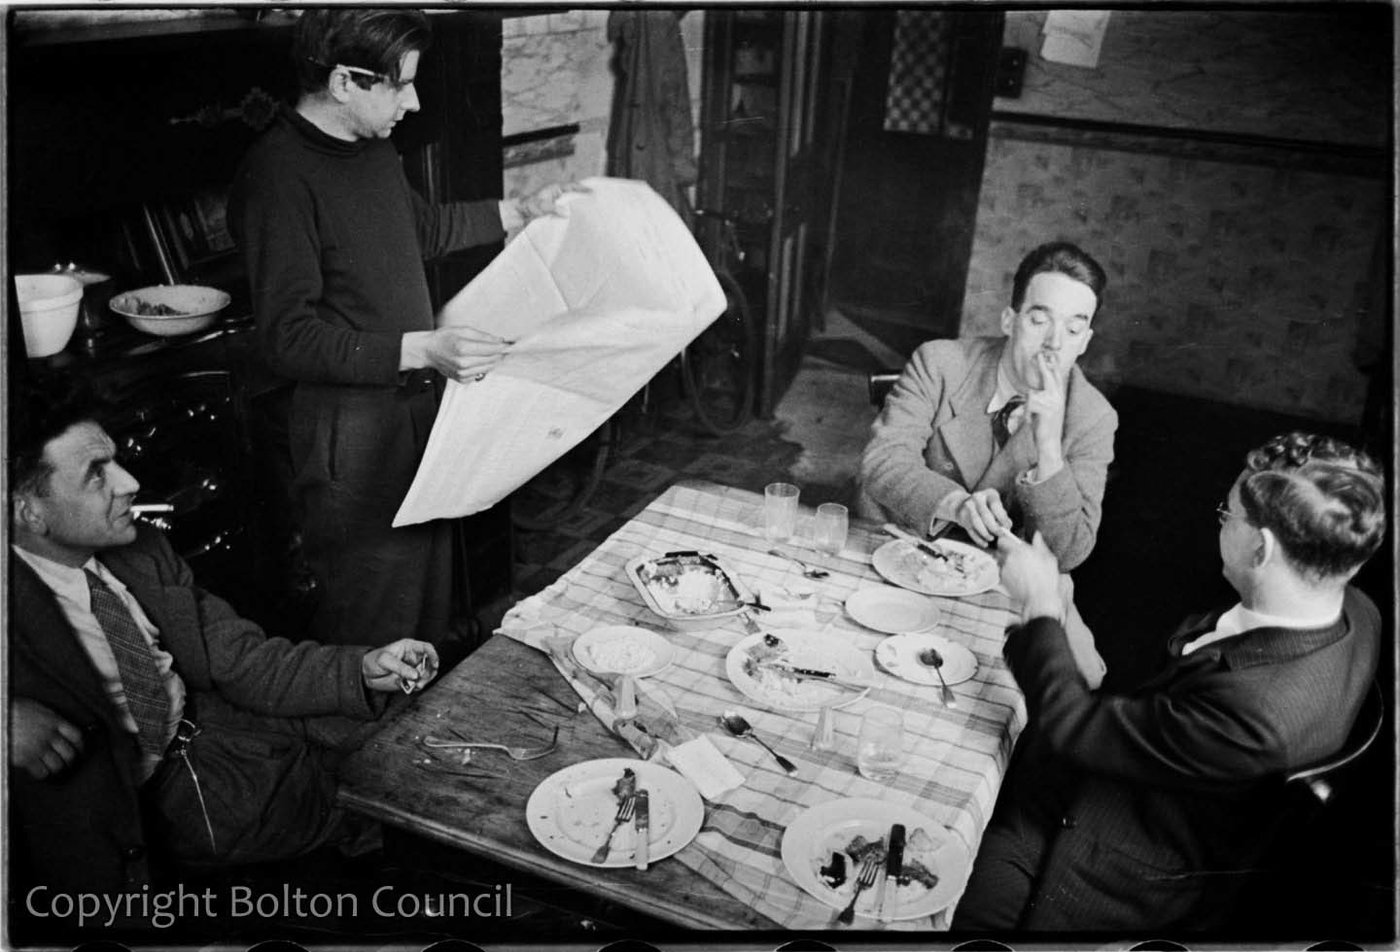 A black and white photograph of a group of four men from the Mass Observation Project, sitting and smoking around a small dining table, on which the rests of a meal can be seen.